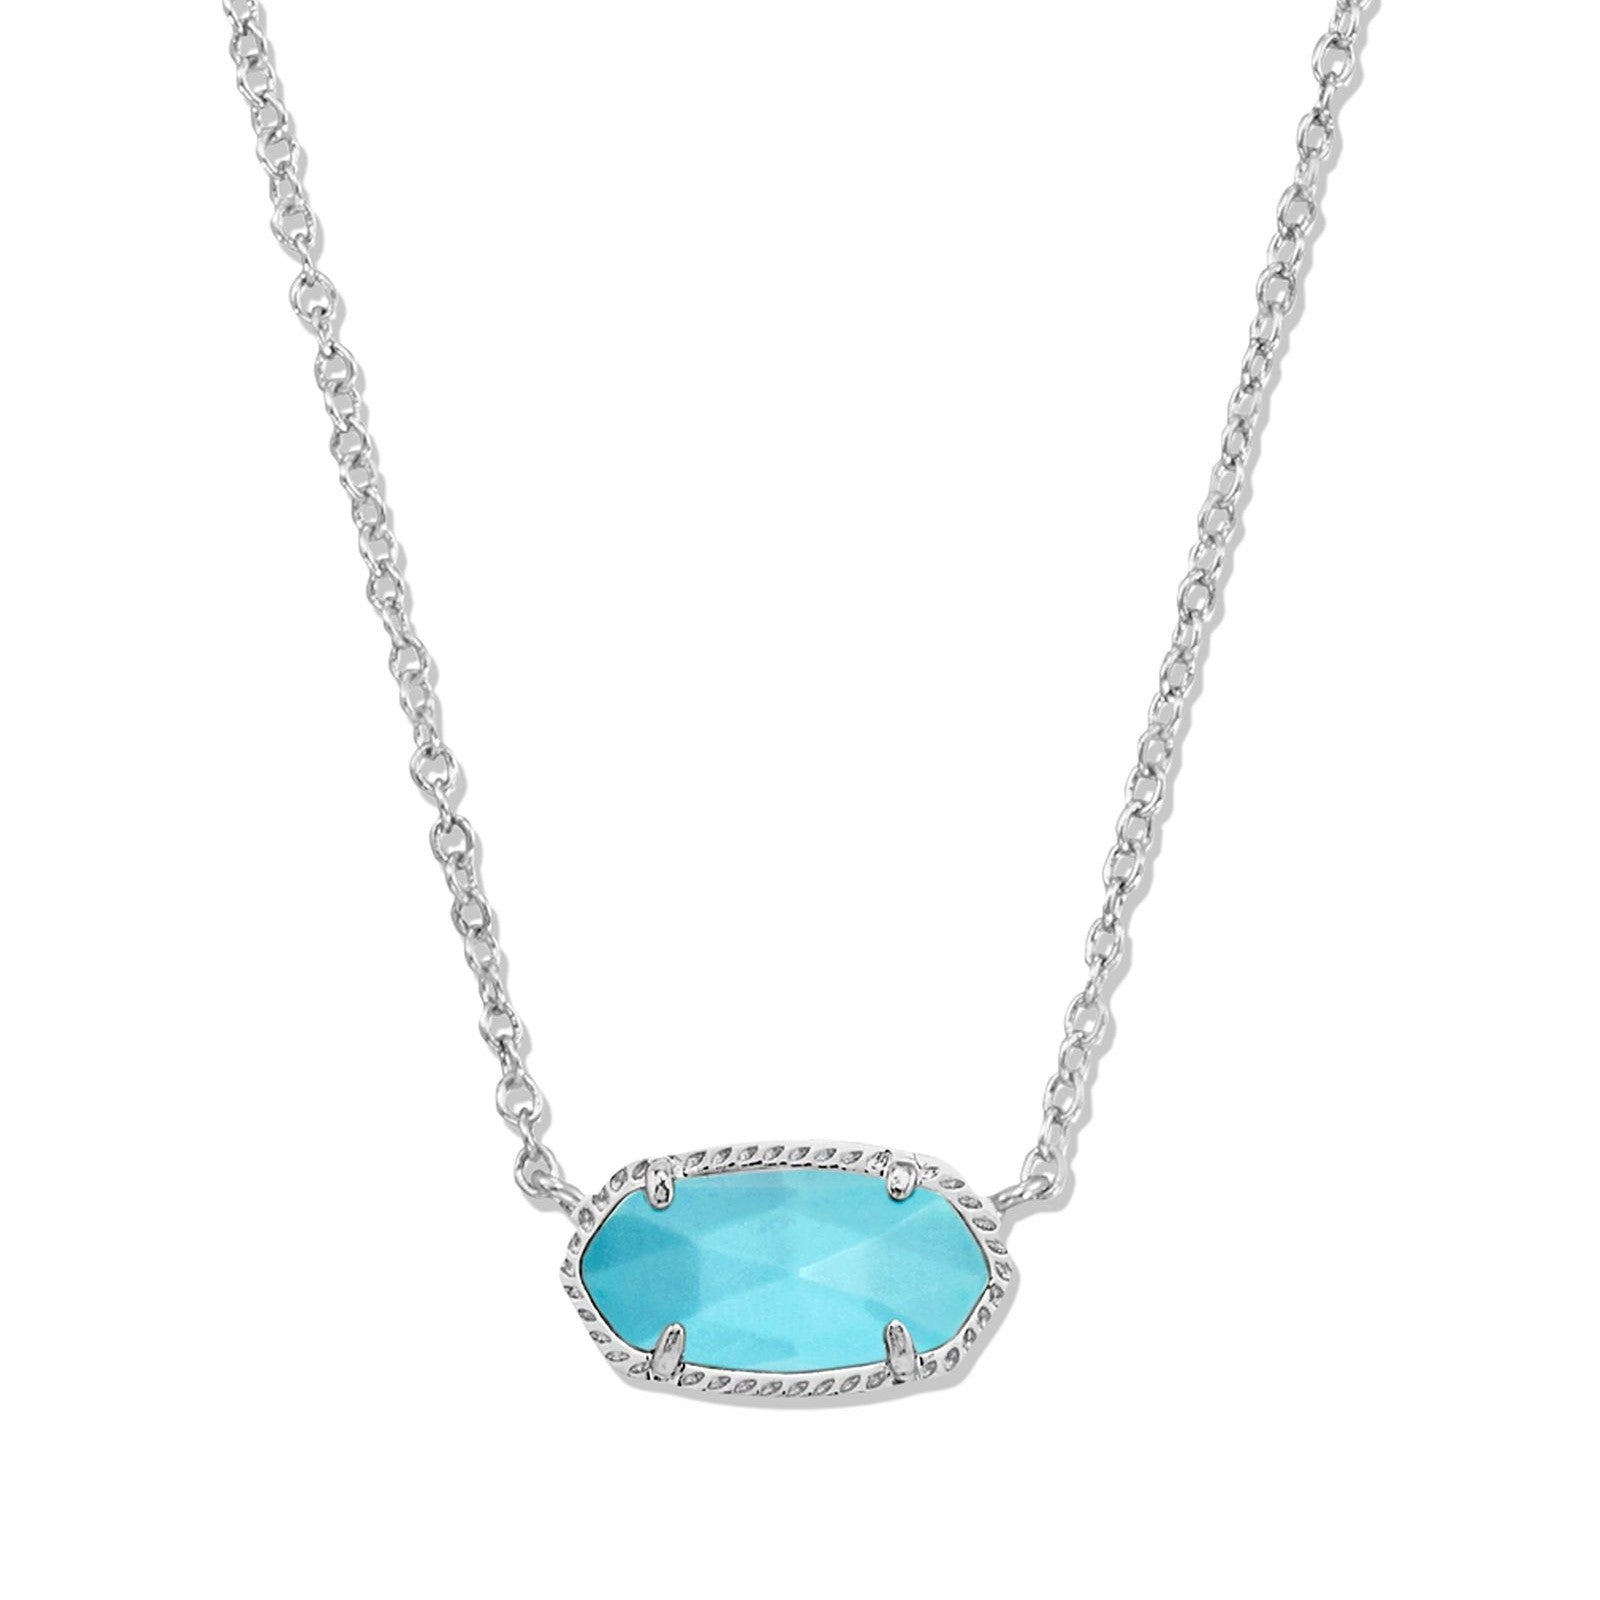 Kendra Scott | Elisa Silver Pendant Necklace in Variegated Turquoise Magnesite - Giddy Up Glamour Boutique